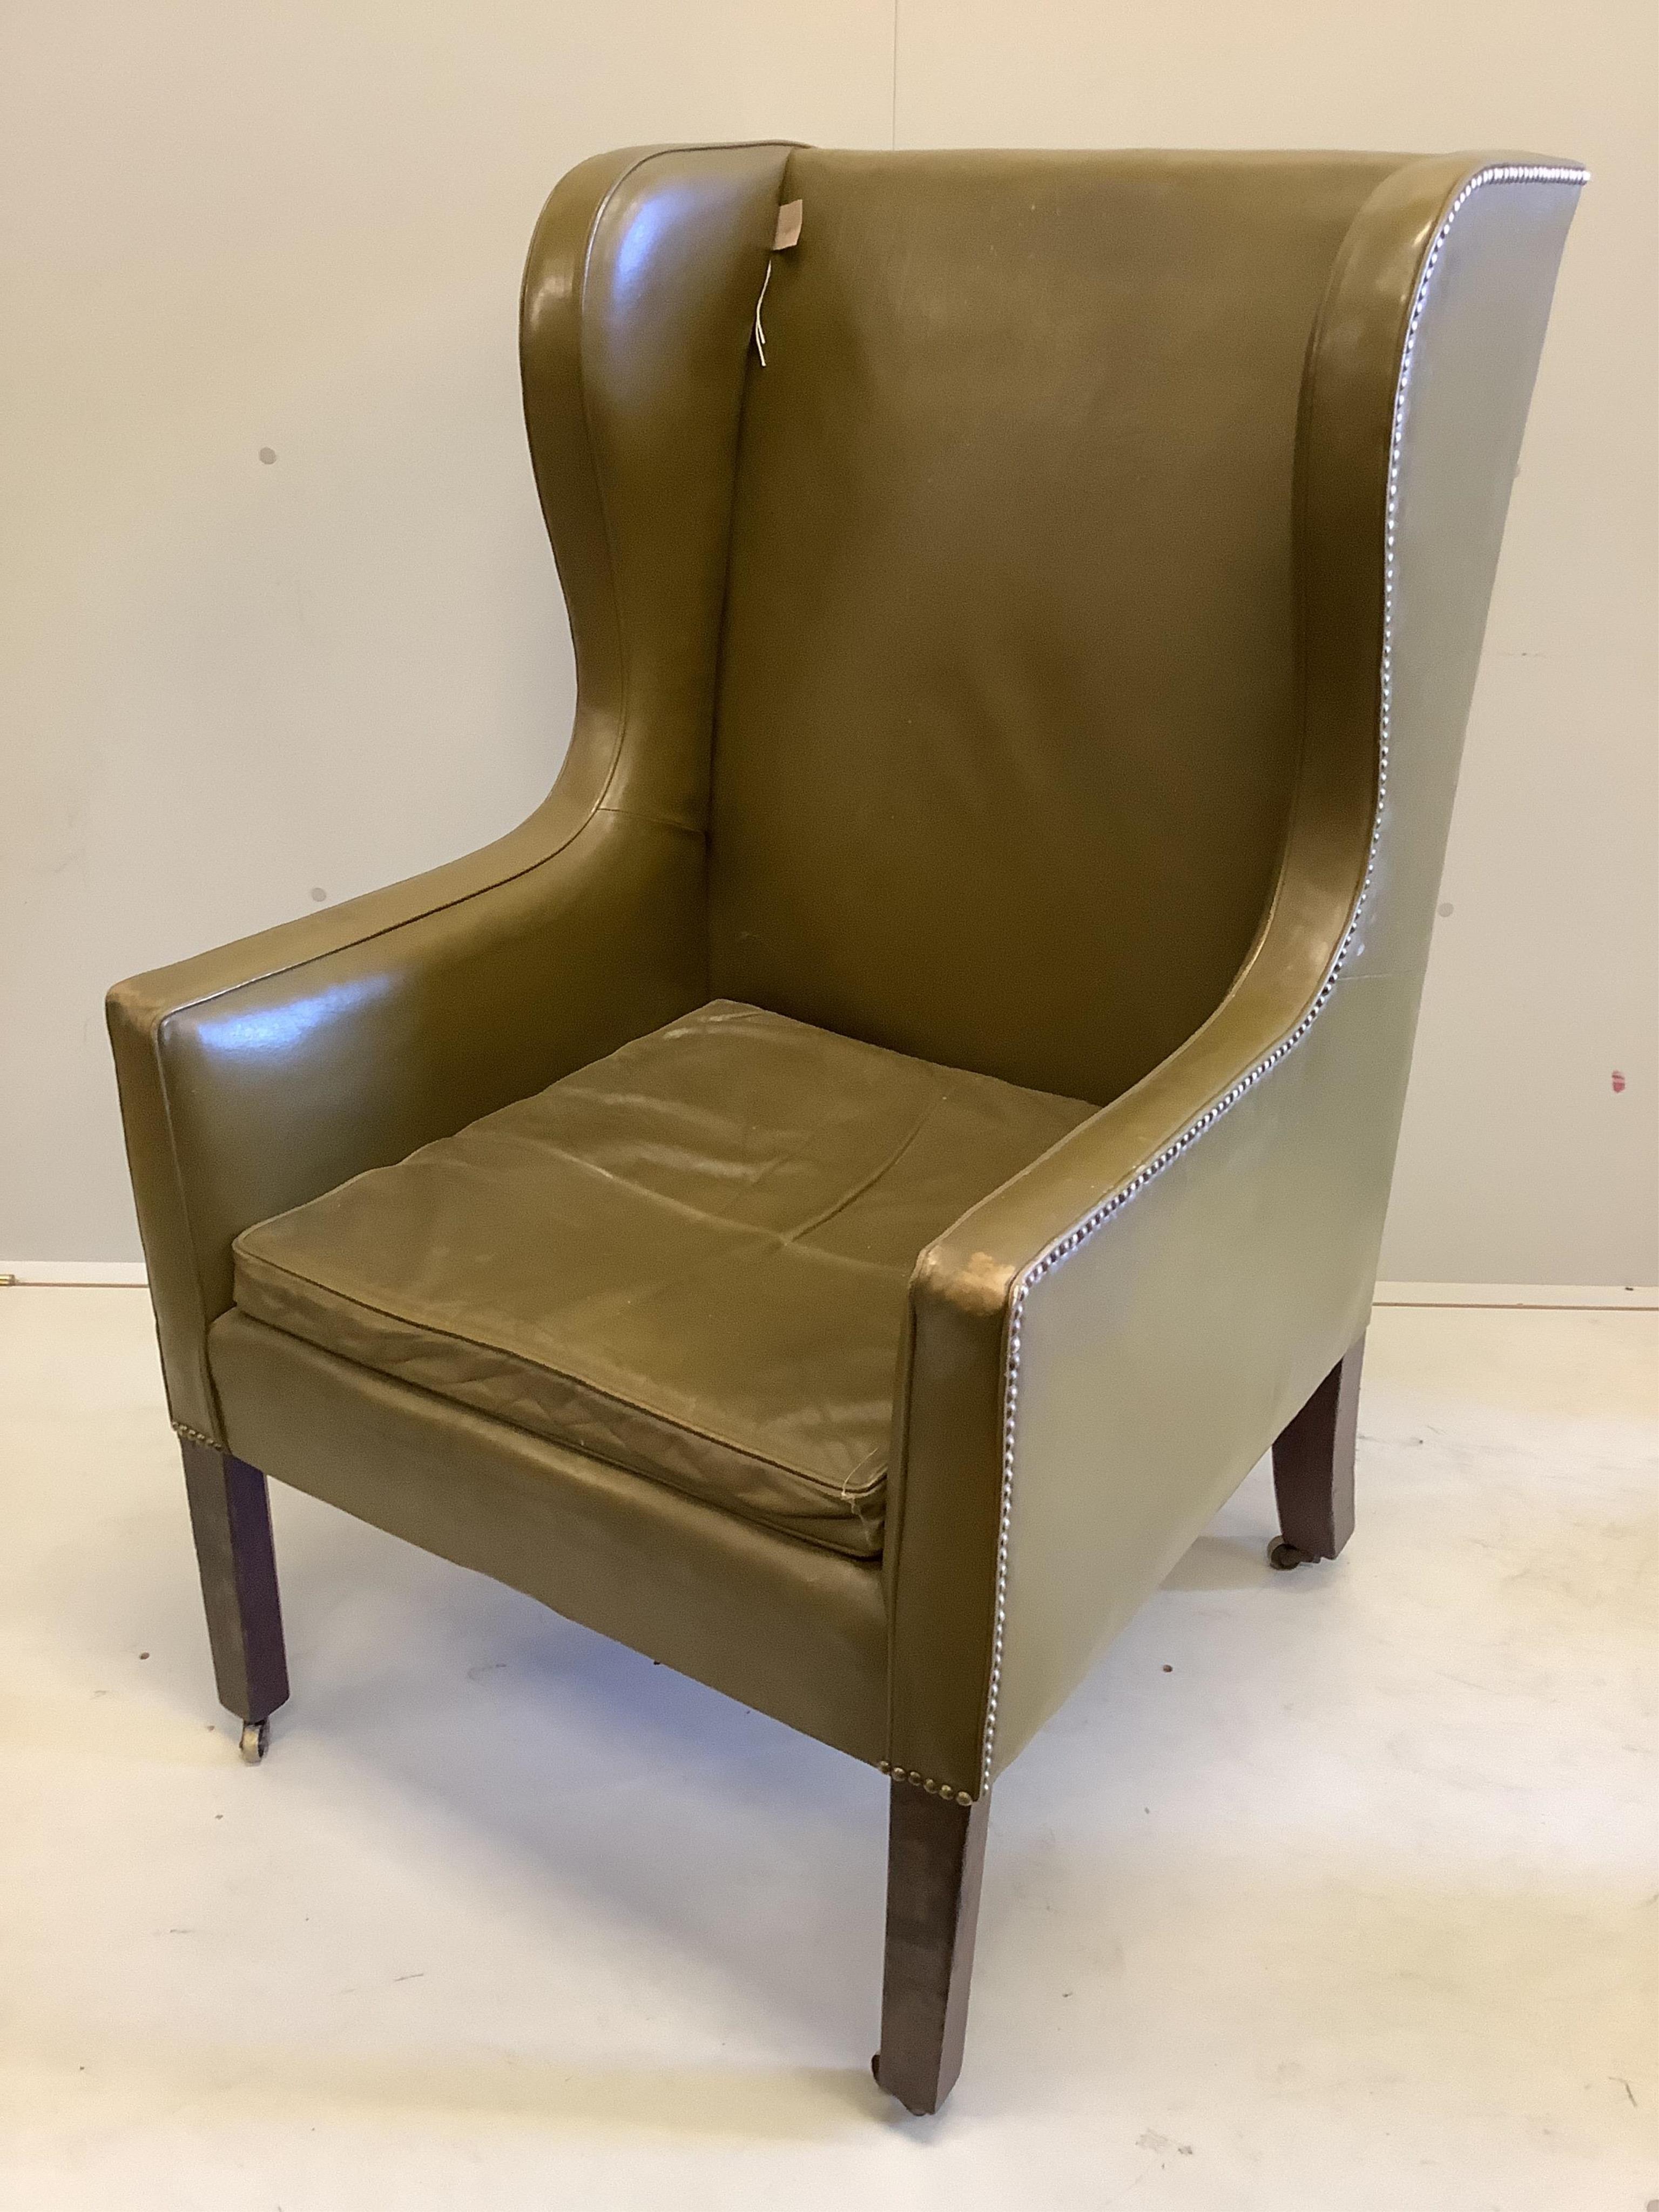 A George III wing armchair with olive leather upholstery, width 70cm, depth 70cm, height 115cm. Condition - fair